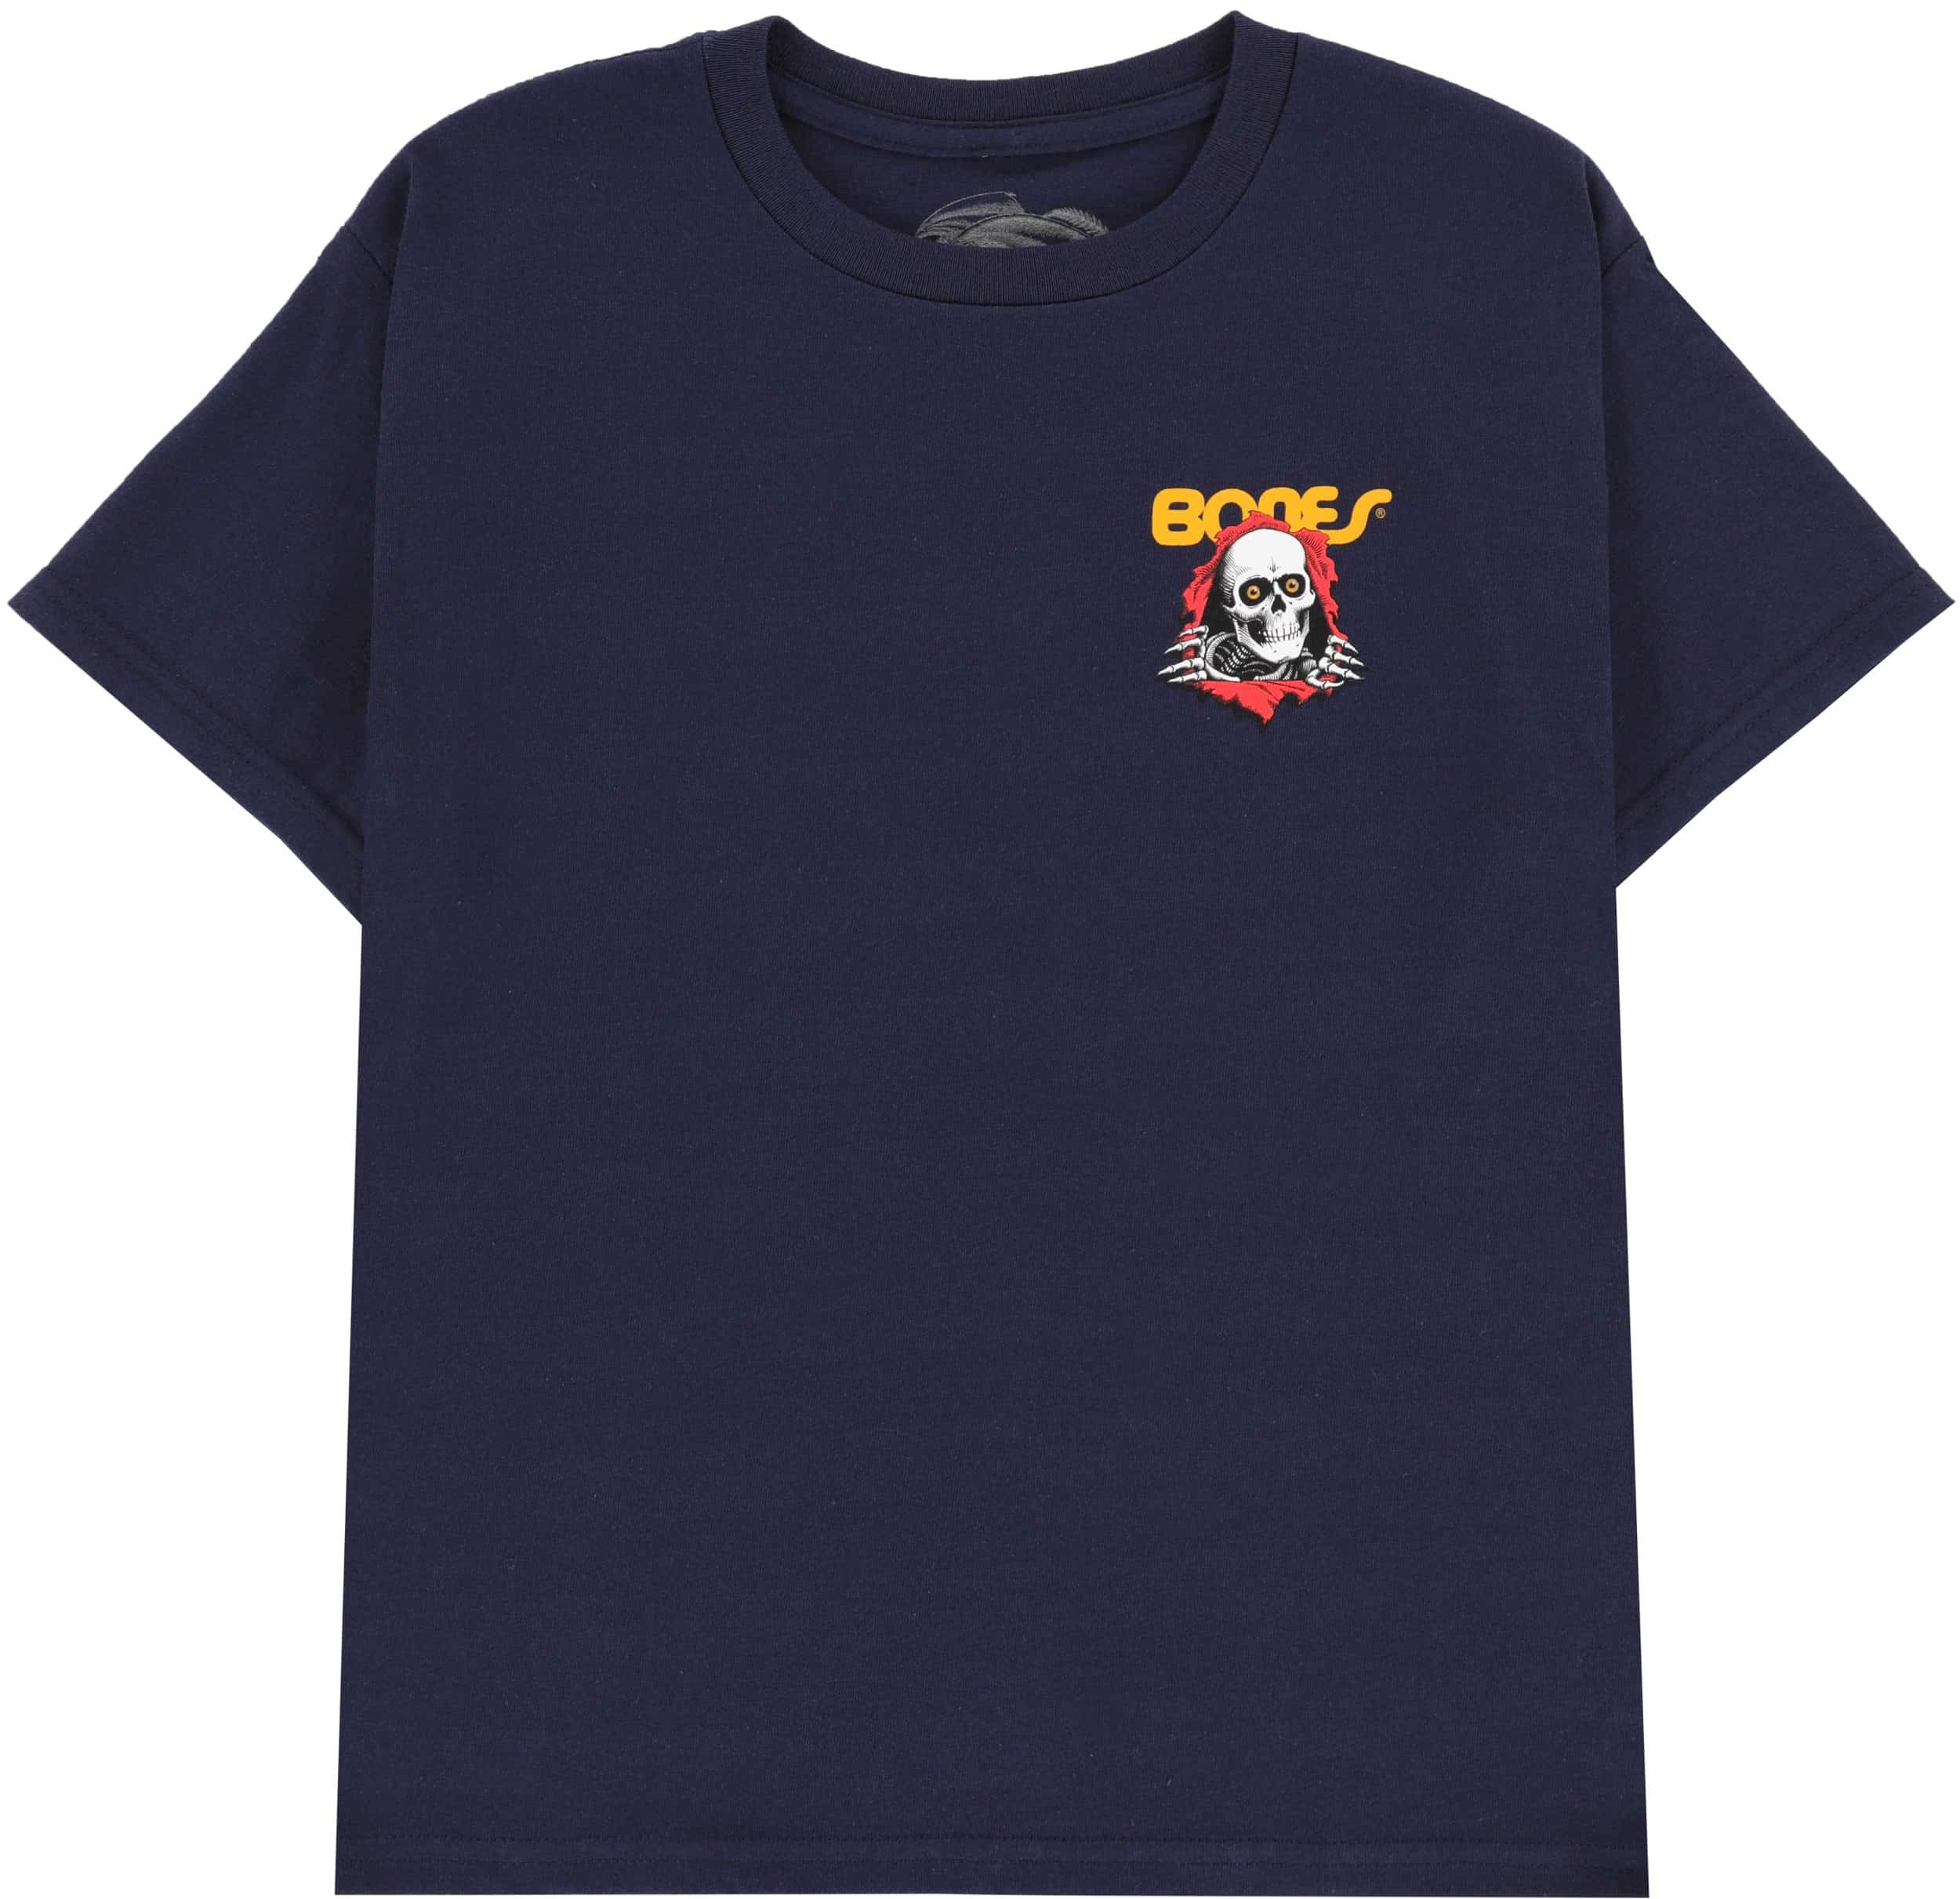 YOUTH RIPPER TEE NAVY